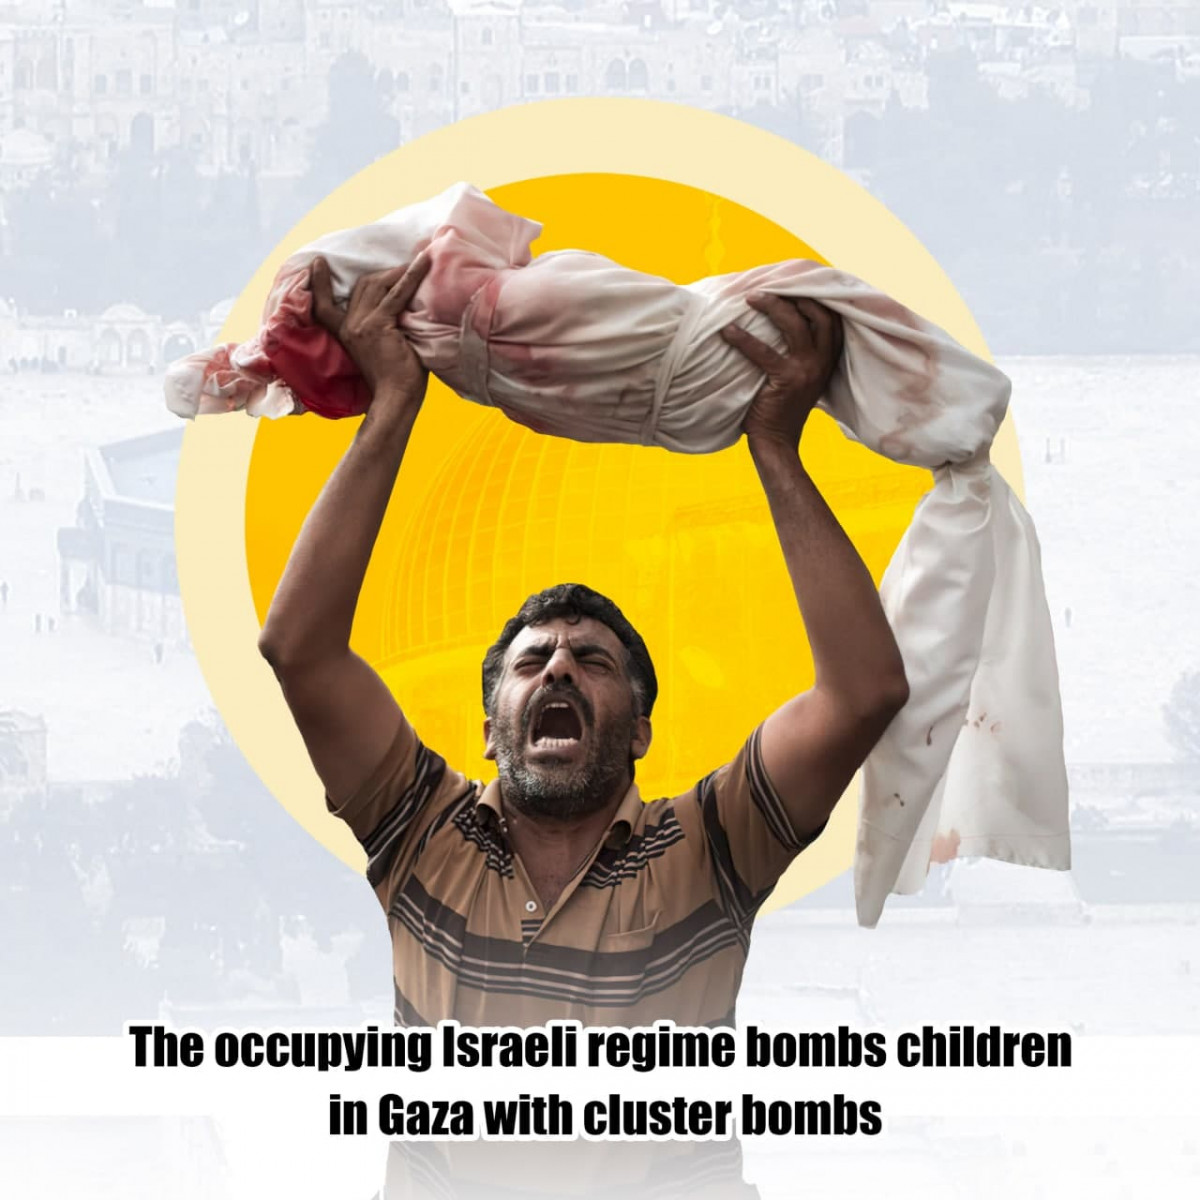 The occupying Israeli regime bombs children in Gaza with cluster bombs